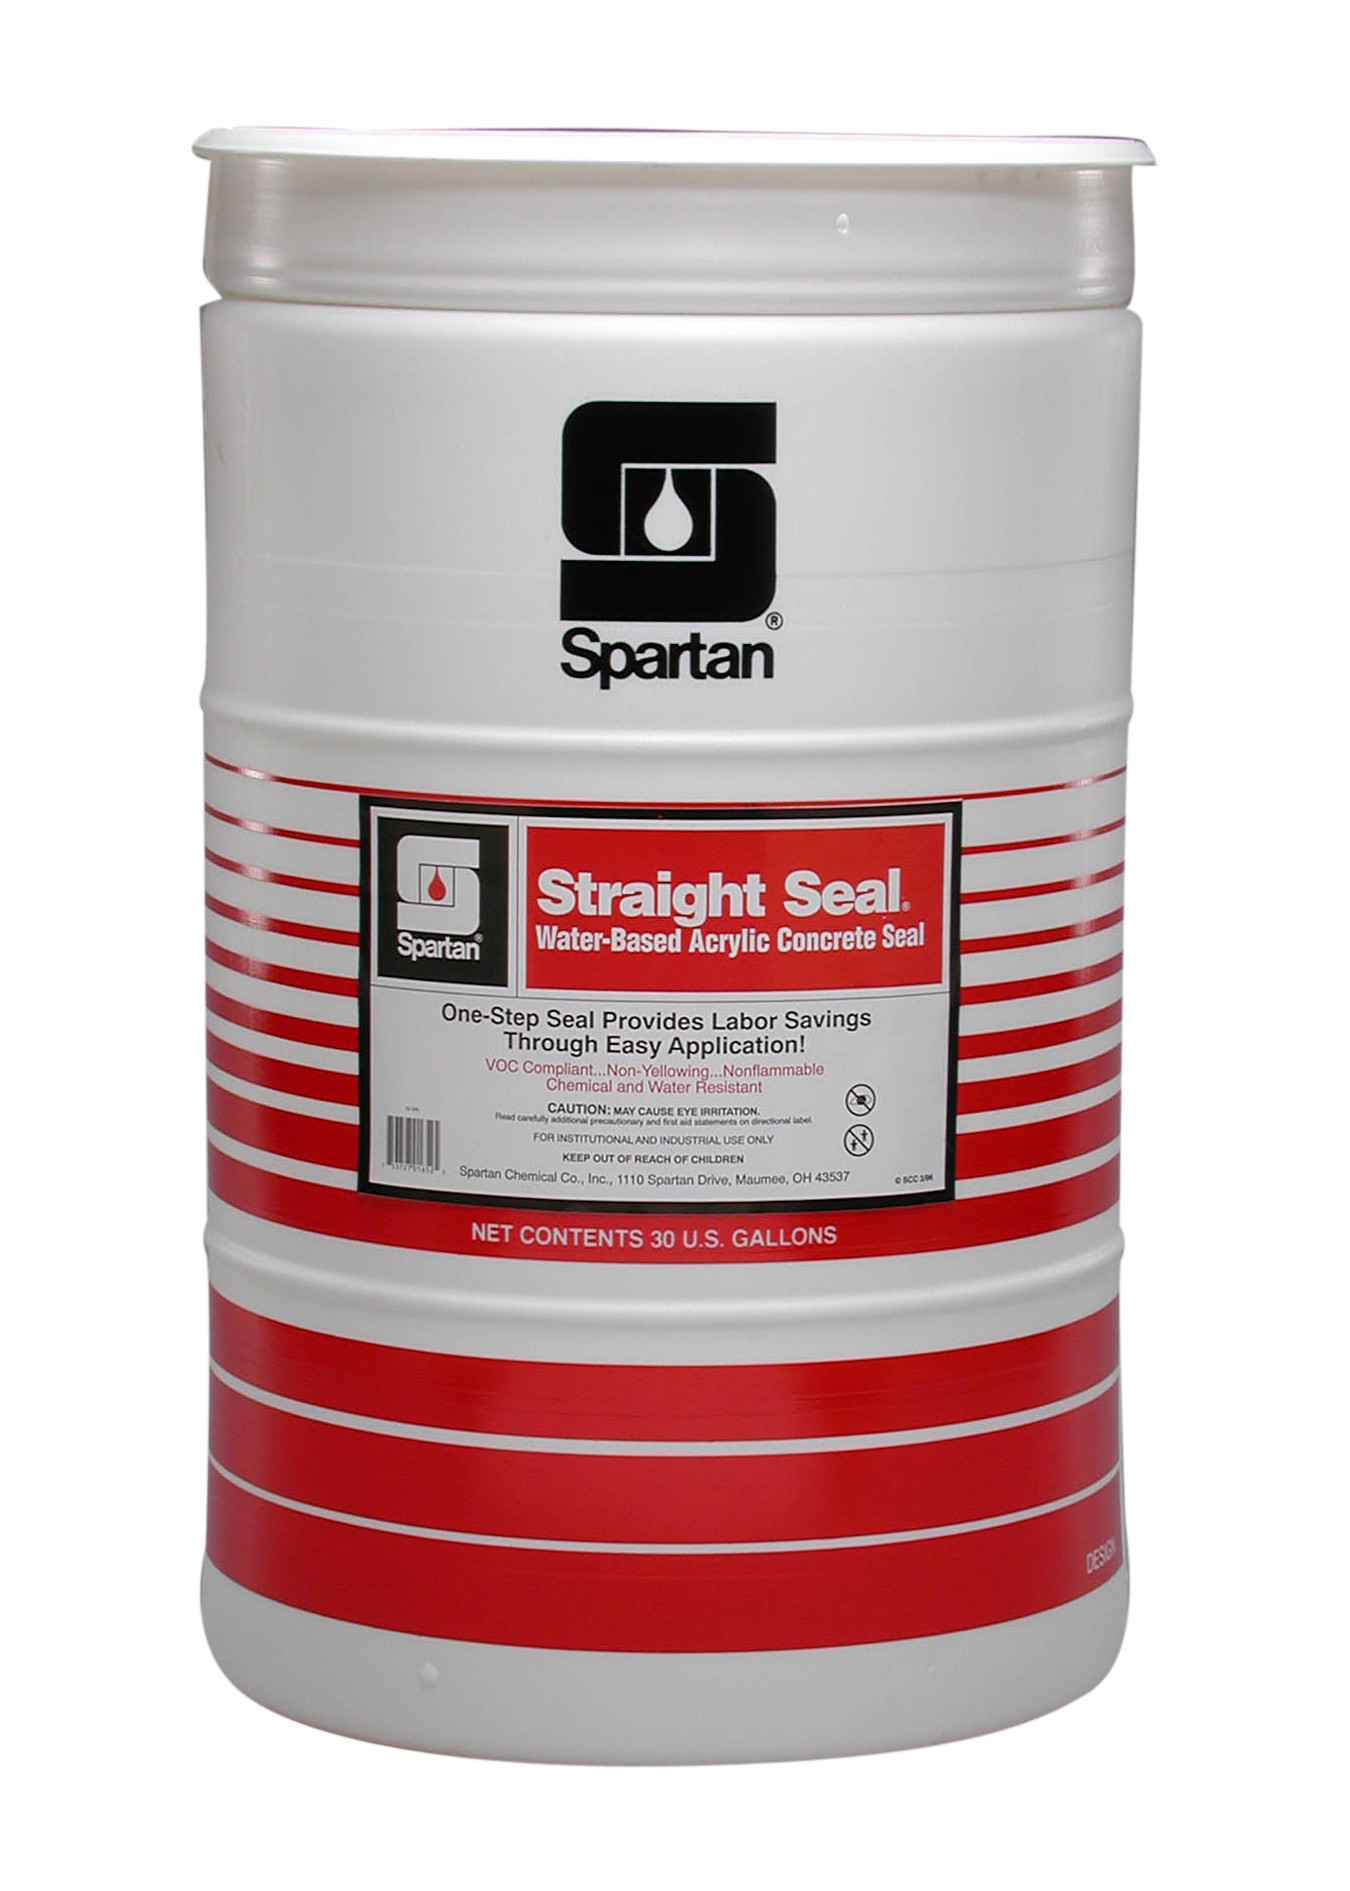 Spartan Chemical Company Straight Seal, 30 GAL DRUM